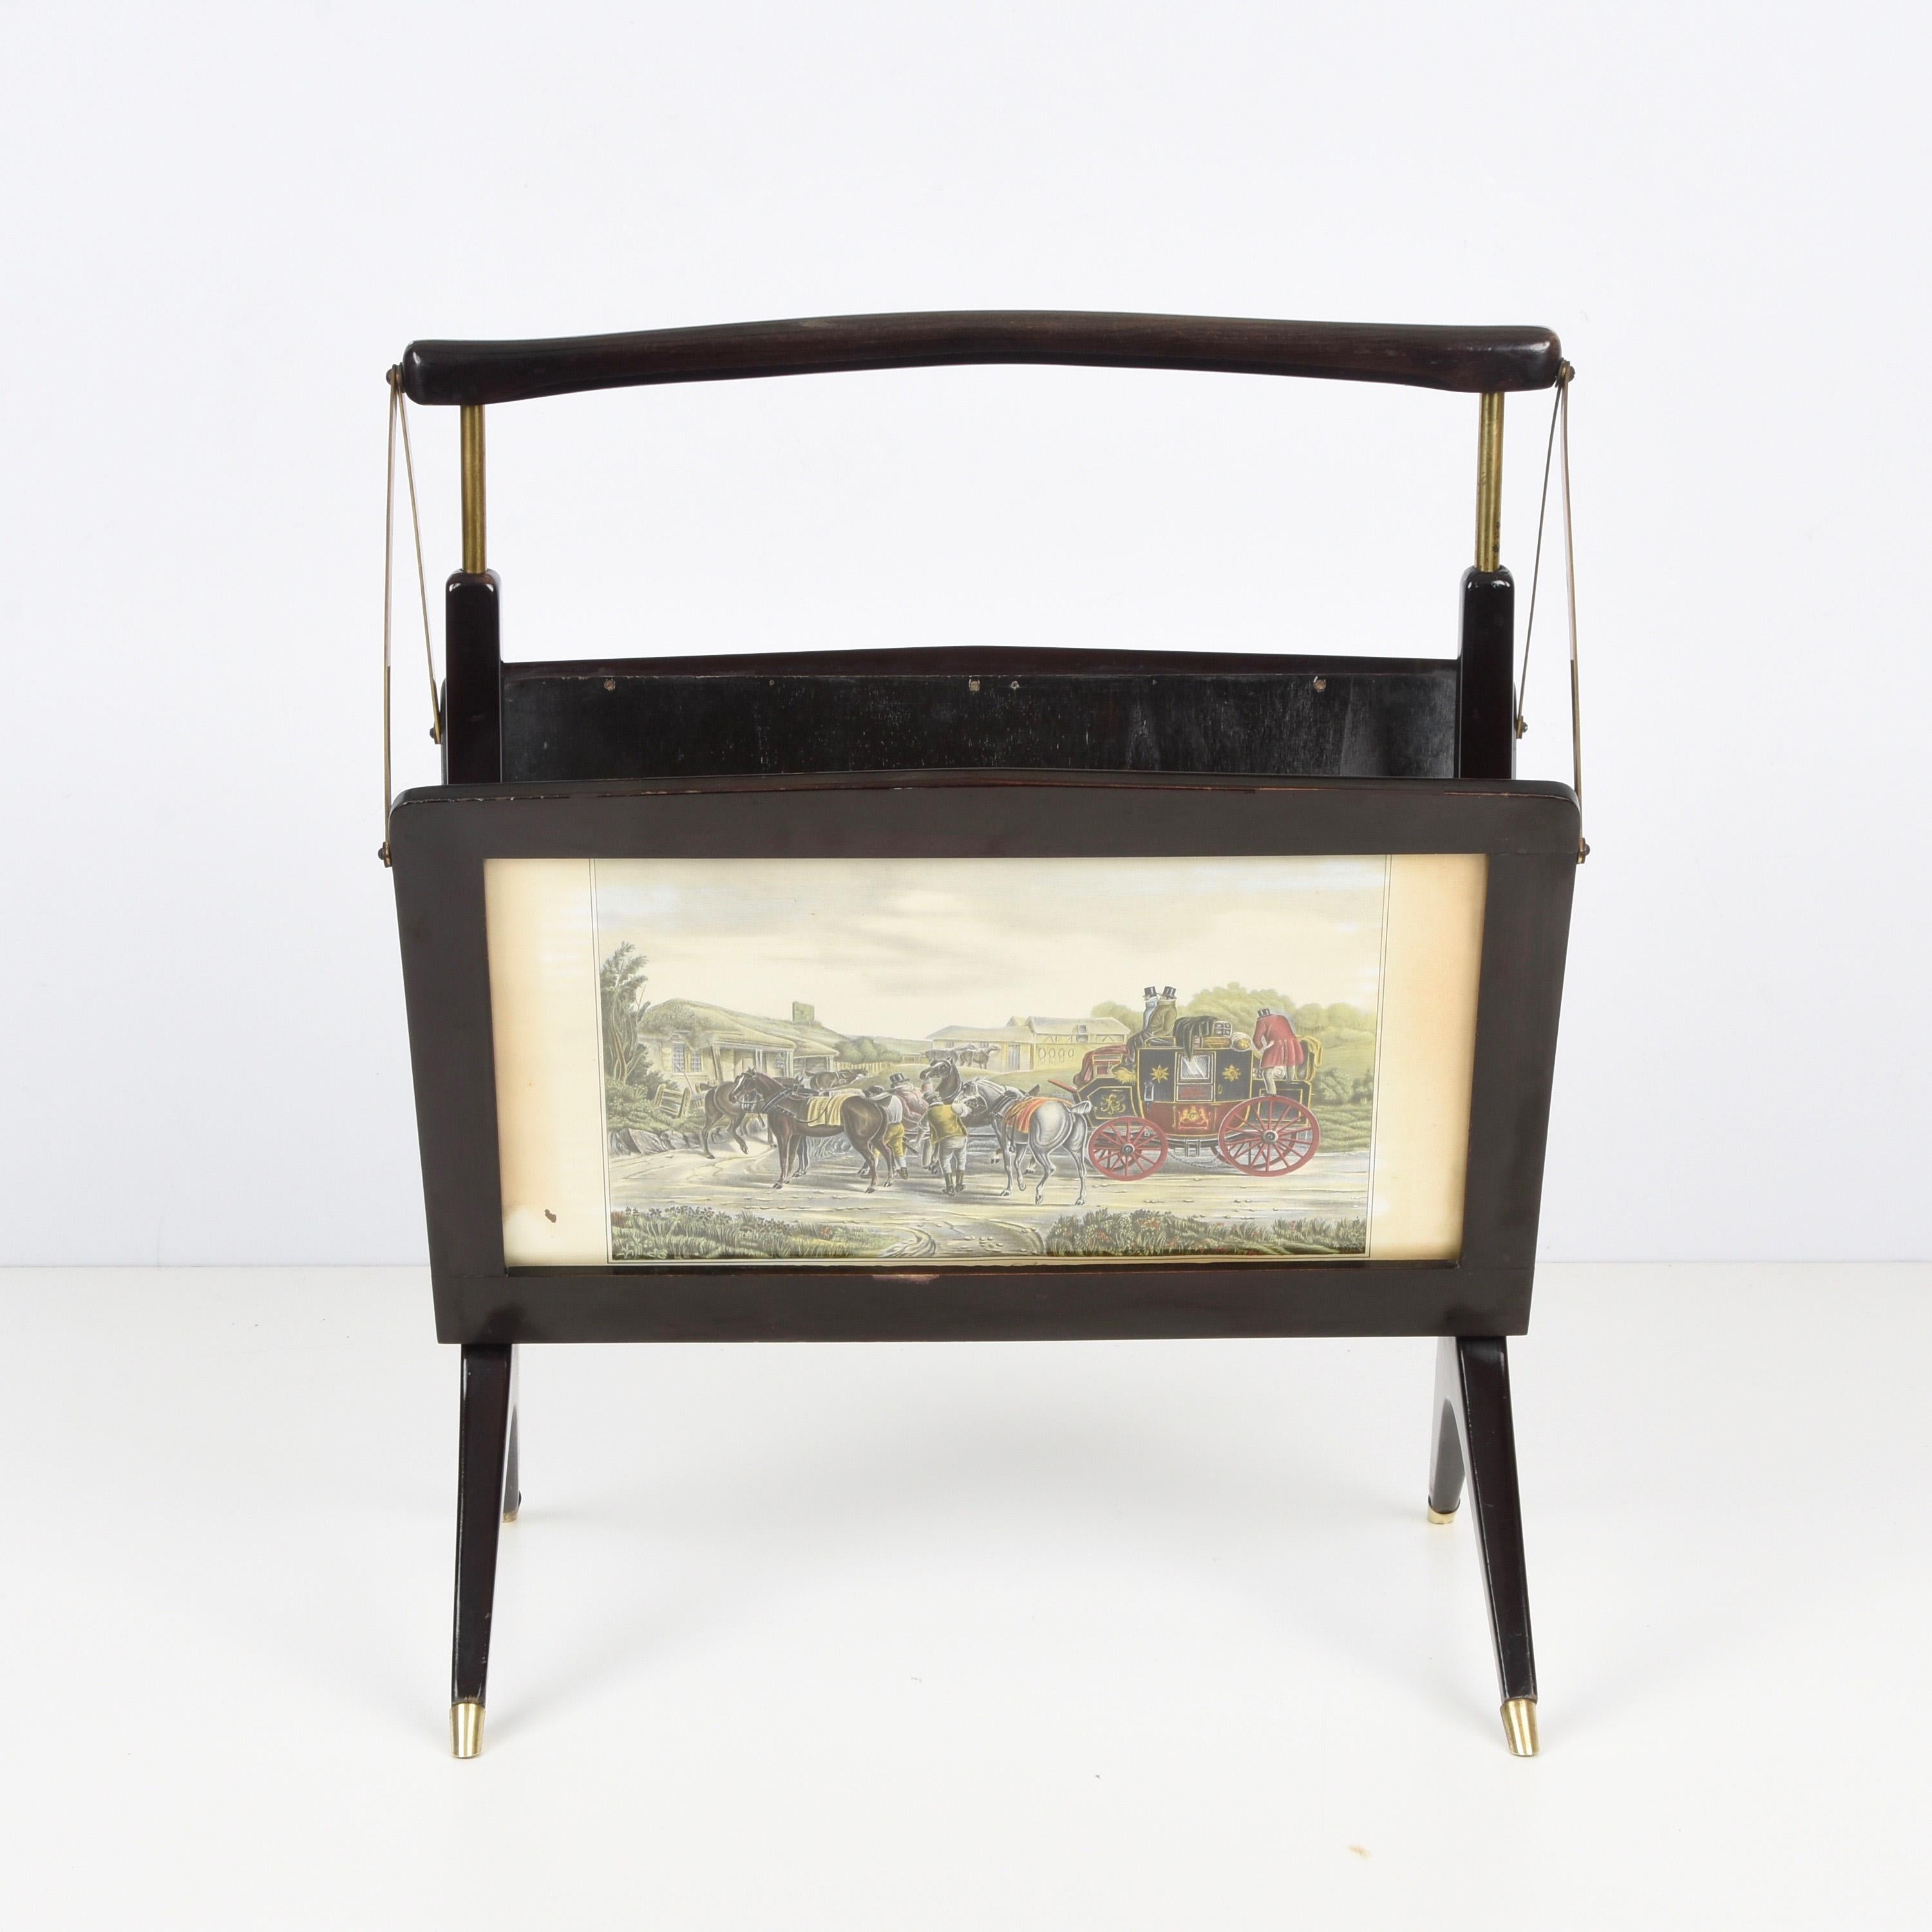 Midcentury Cesare Lacca Wood and Brass Italian Foldable Magazine Rack, 1950s For Sale 8